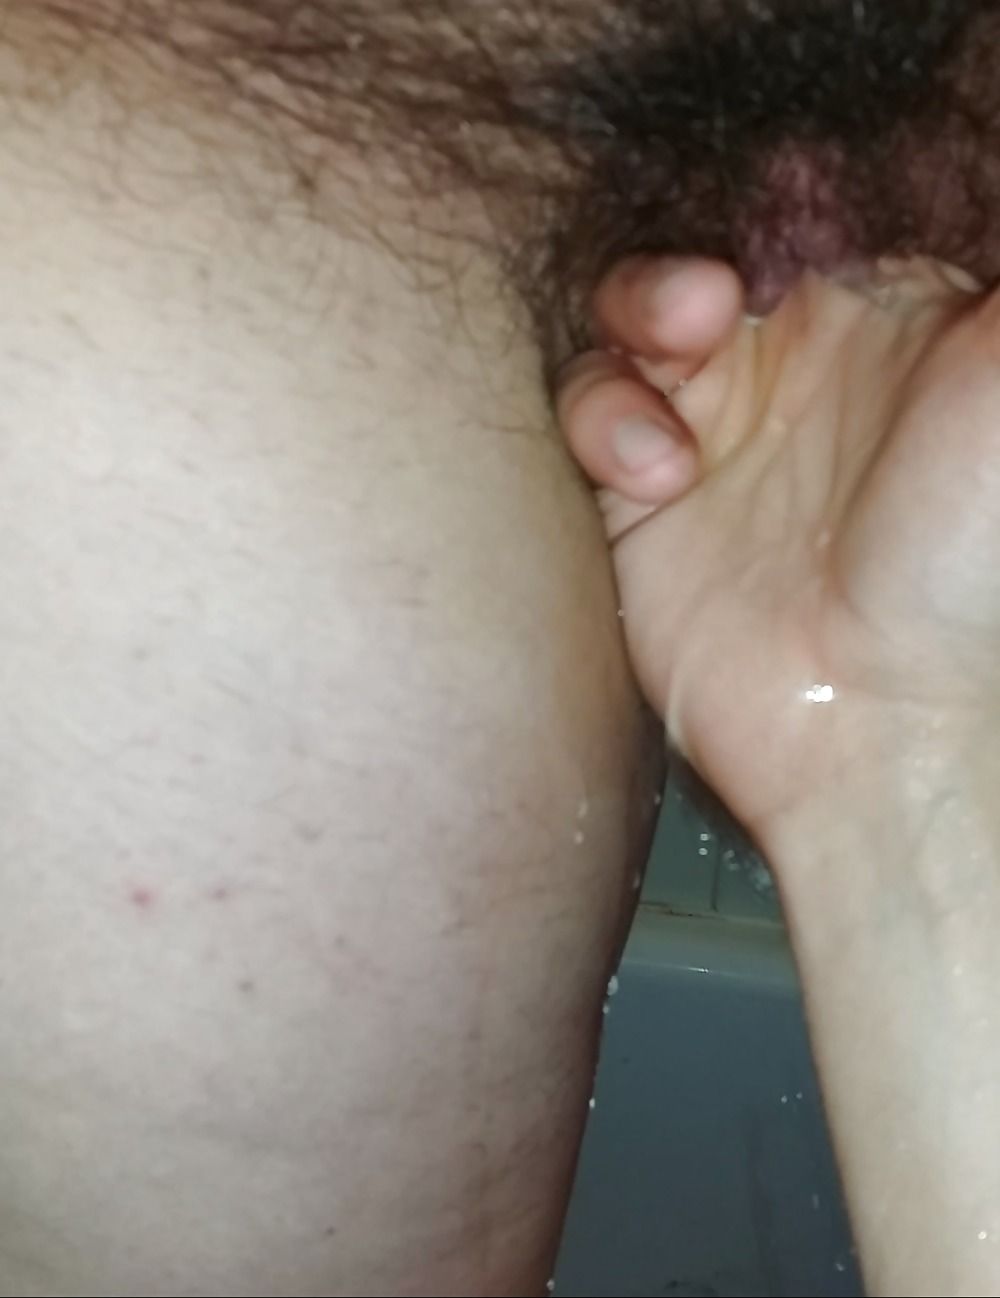 Fingering Hairy Pussy For Squirt #8